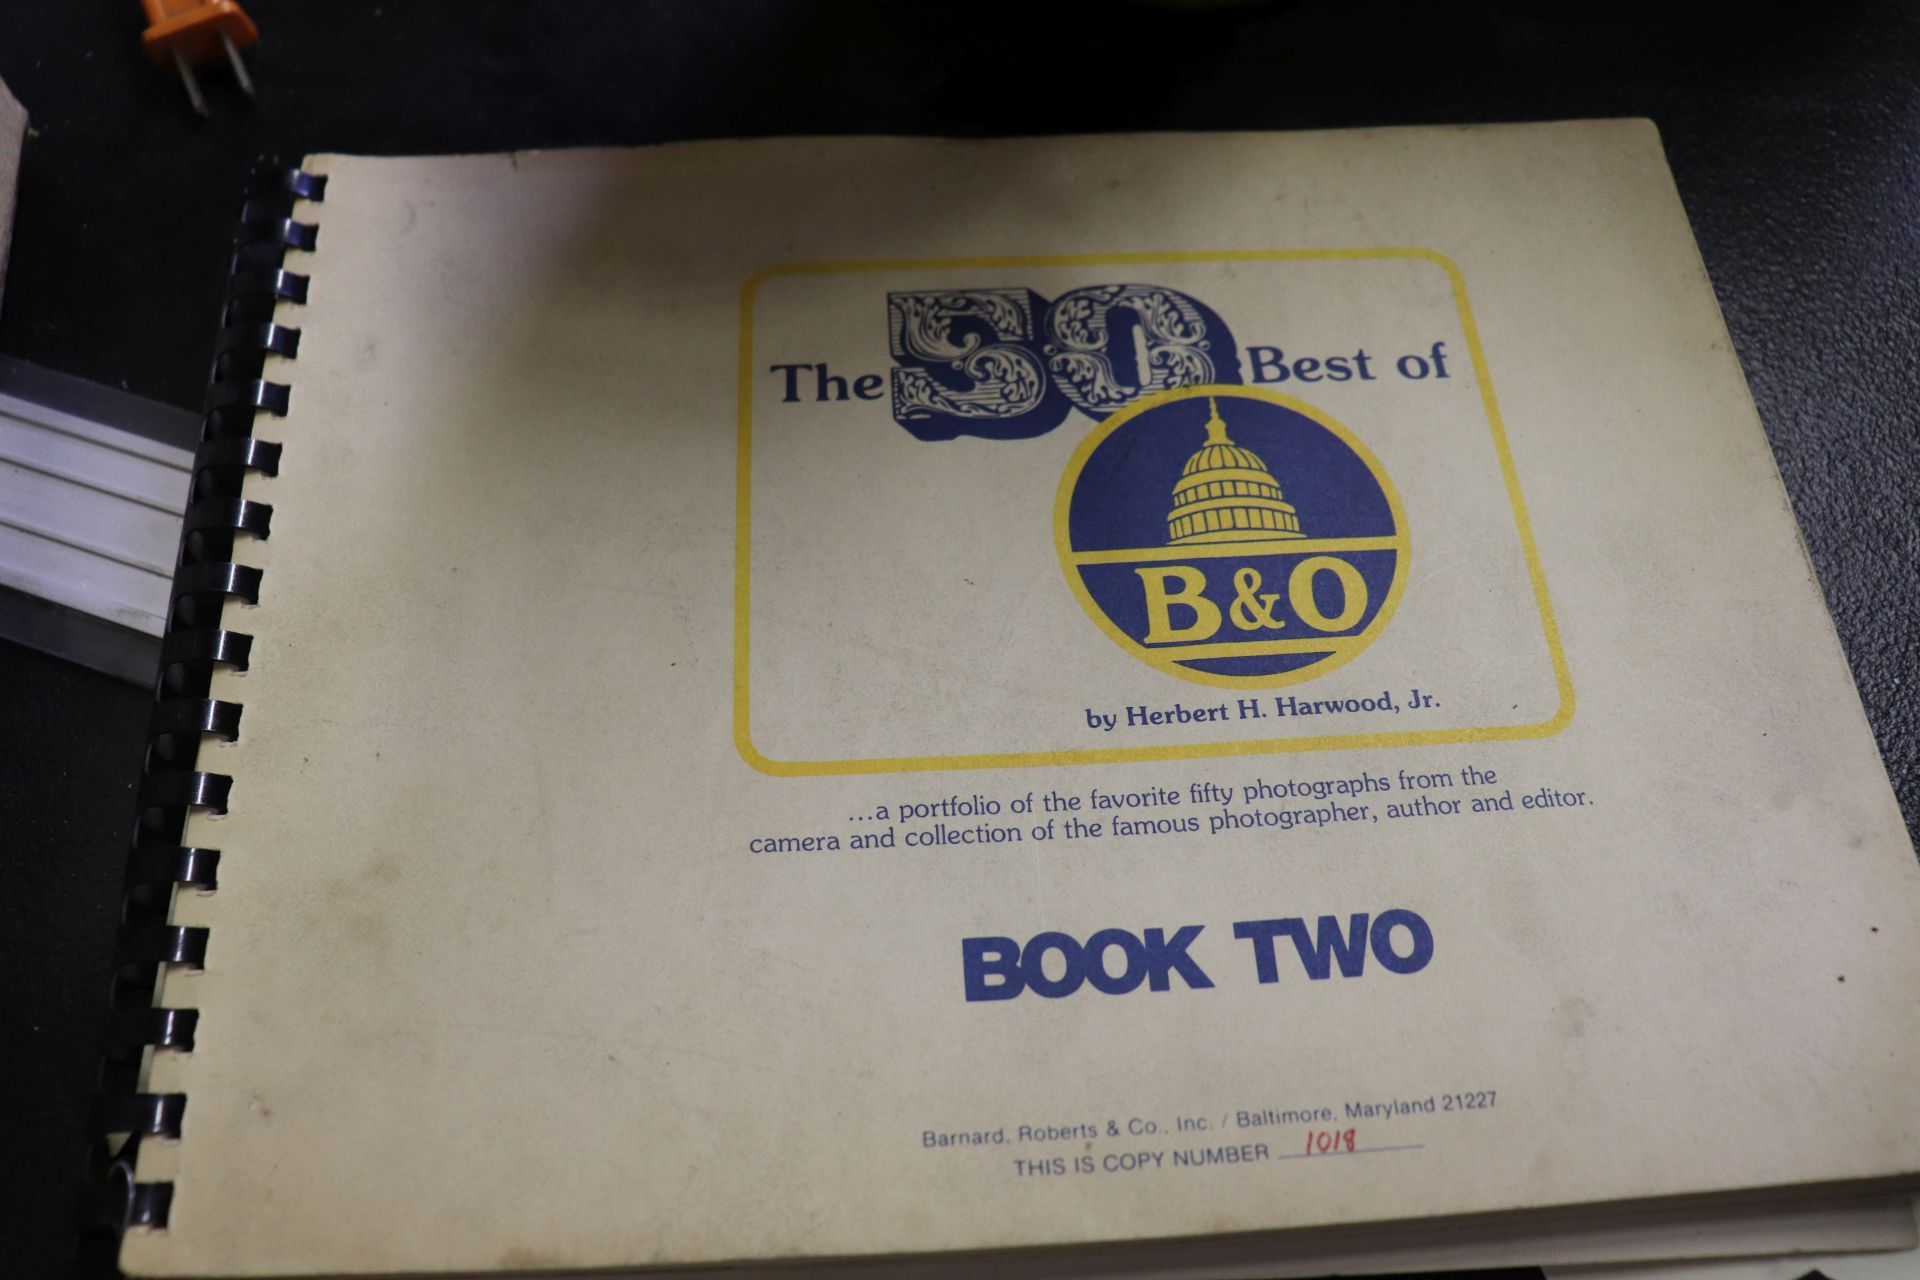 Book, "The 50 Best Years of B&O Railroad", by Herbert H. Harwood Jr., Book 2, published June 22, 197